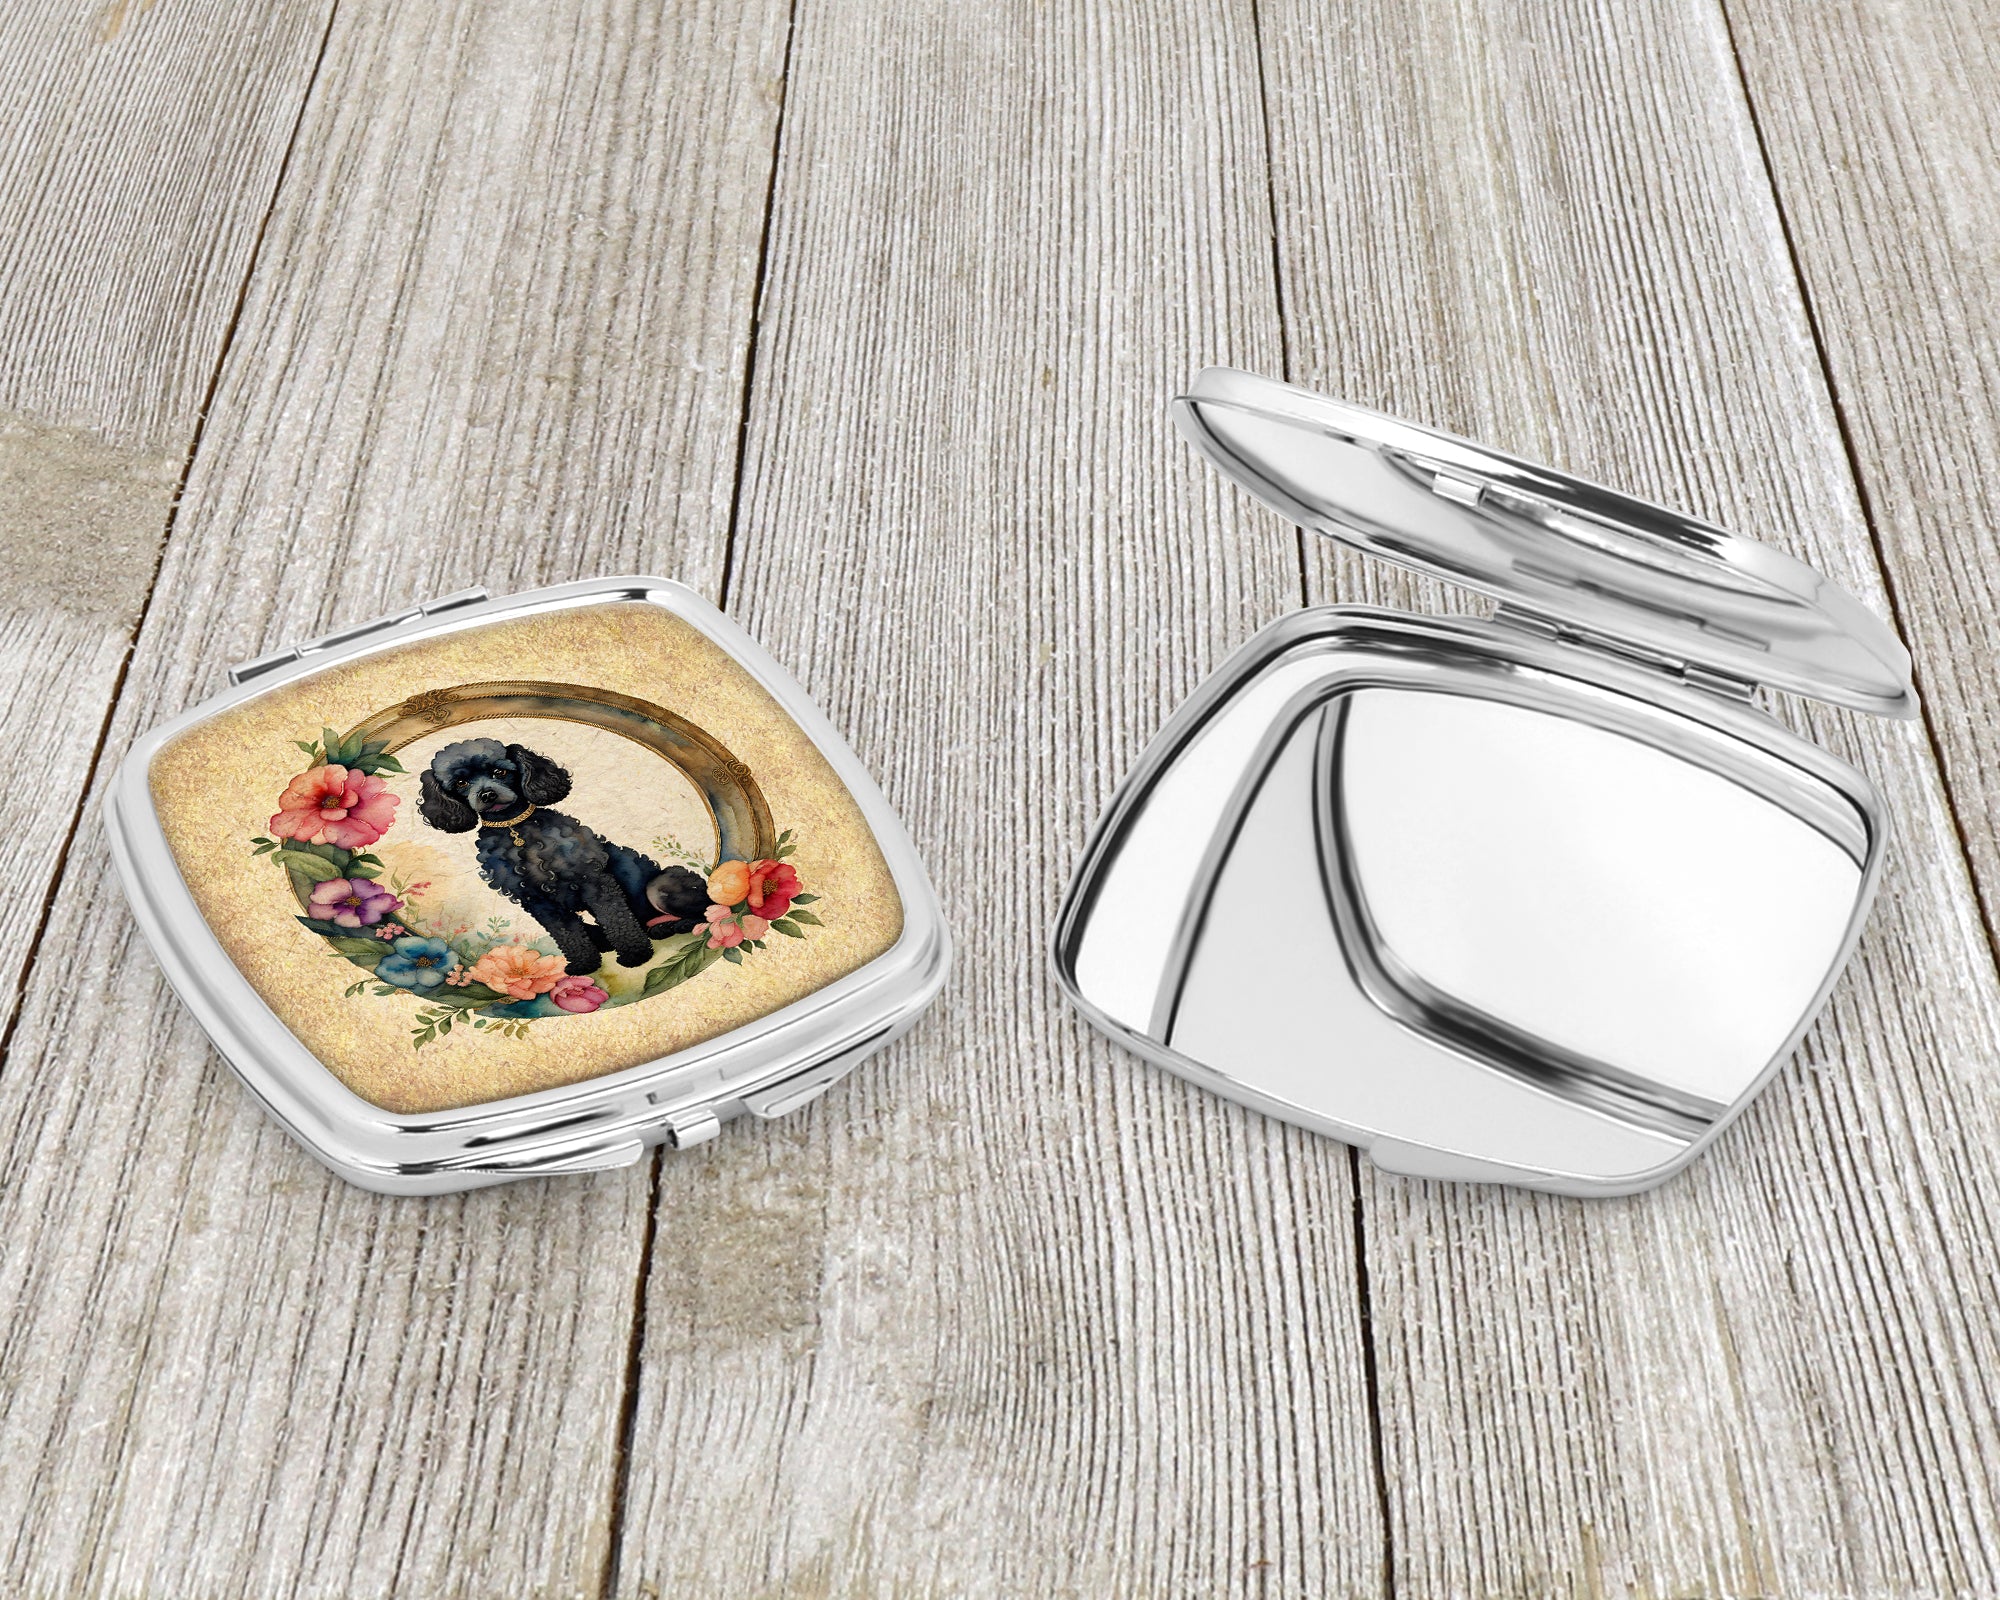 Black Poodle and Flowers Compact Mirror